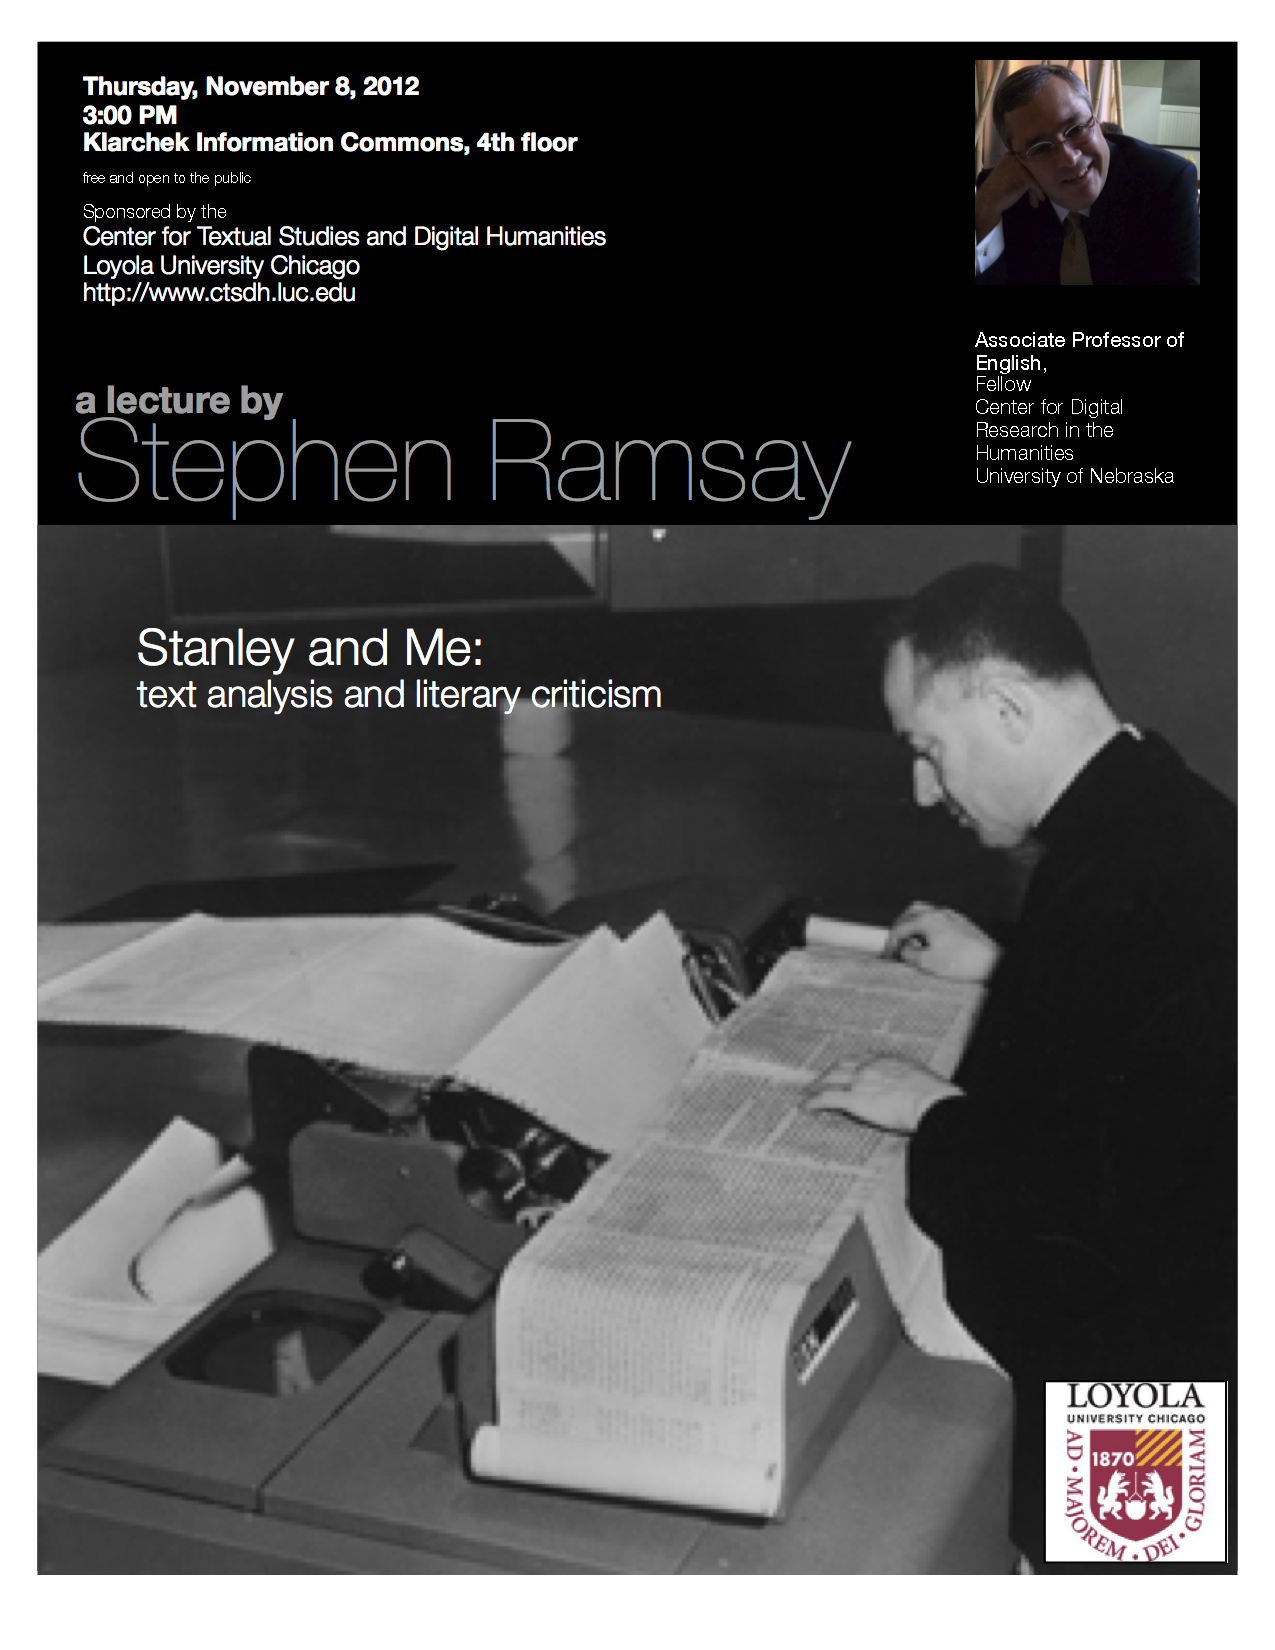 Stanley & Me: Text Analysis and Literary Criticism - Stephen Ramsay, November 8, 2012